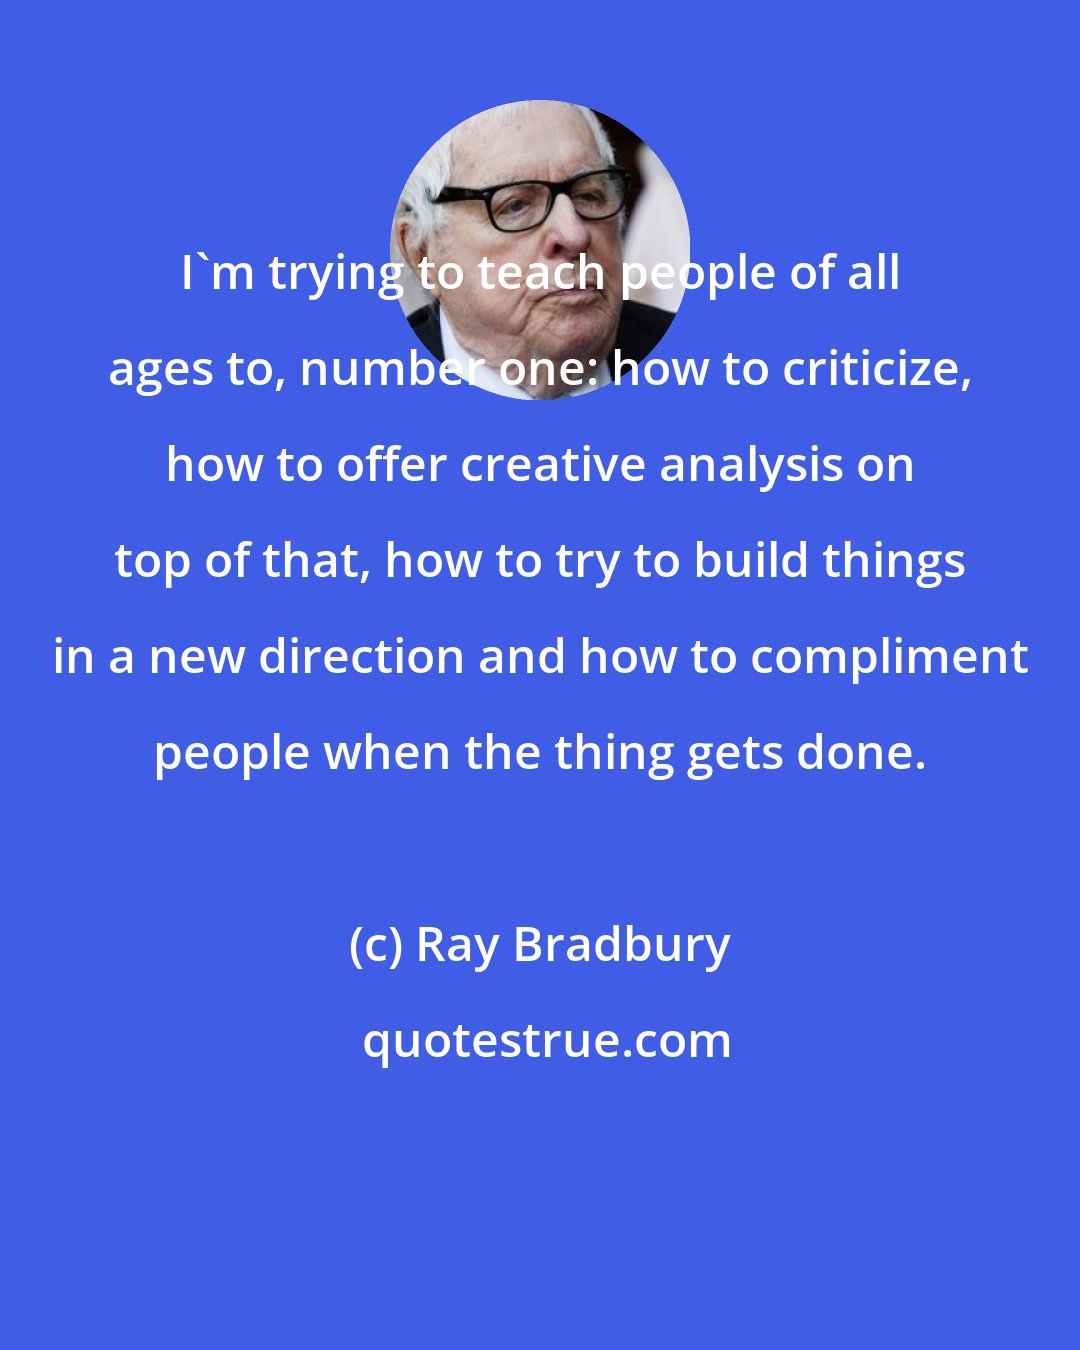 Ray Bradbury: I'm trying to teach people of all ages to, number one: how to criticize, how to offer creative analysis on top of that, how to try to build things in a new direction and how to compliment people when the thing gets done.